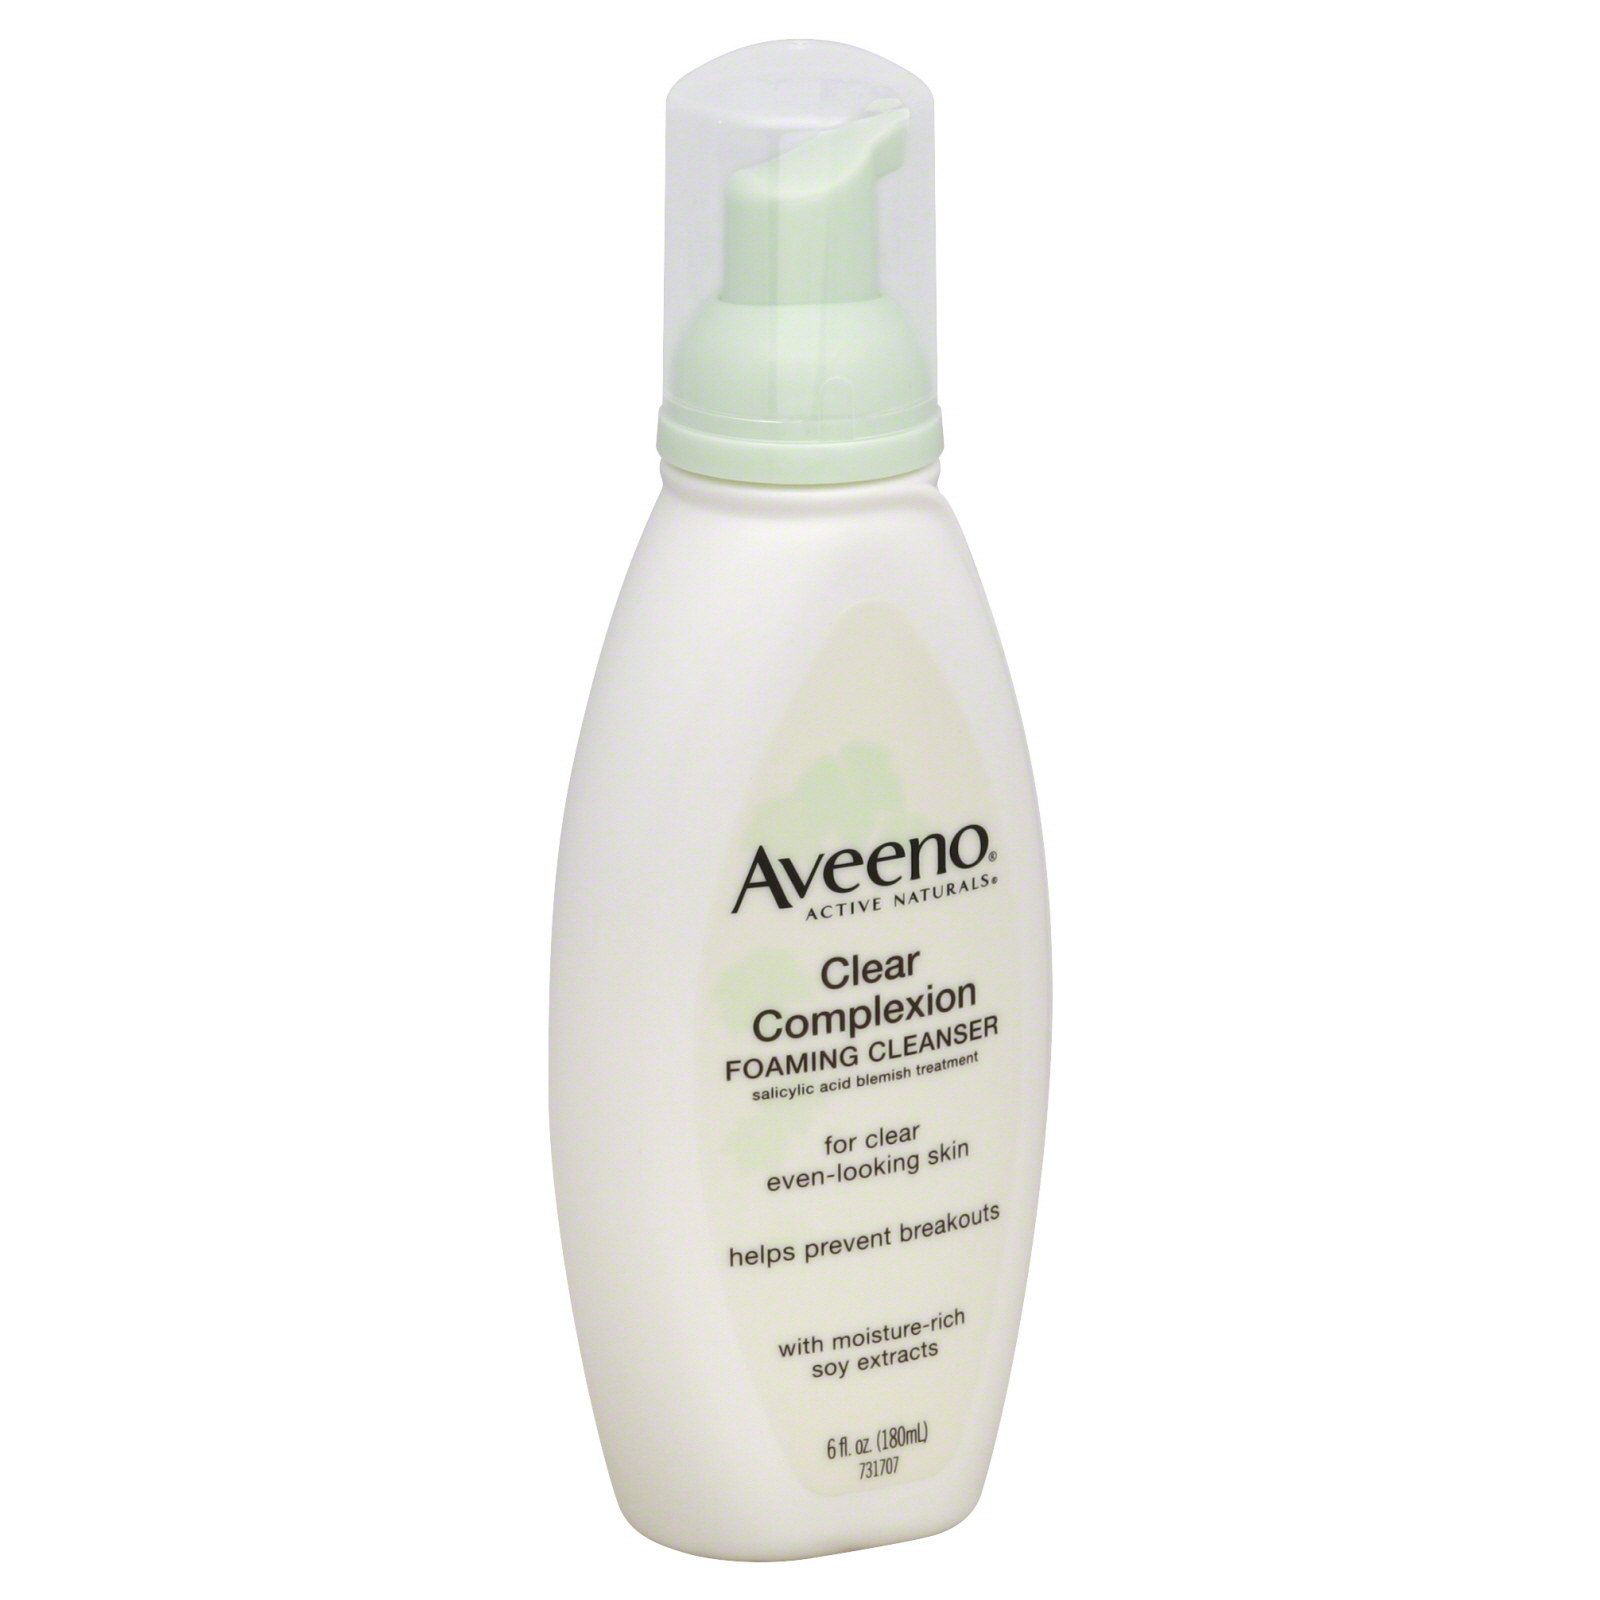 Aveeno Active Naturals Clear Complexion Foaming Cleanser, 6 fl oz (180 ml)